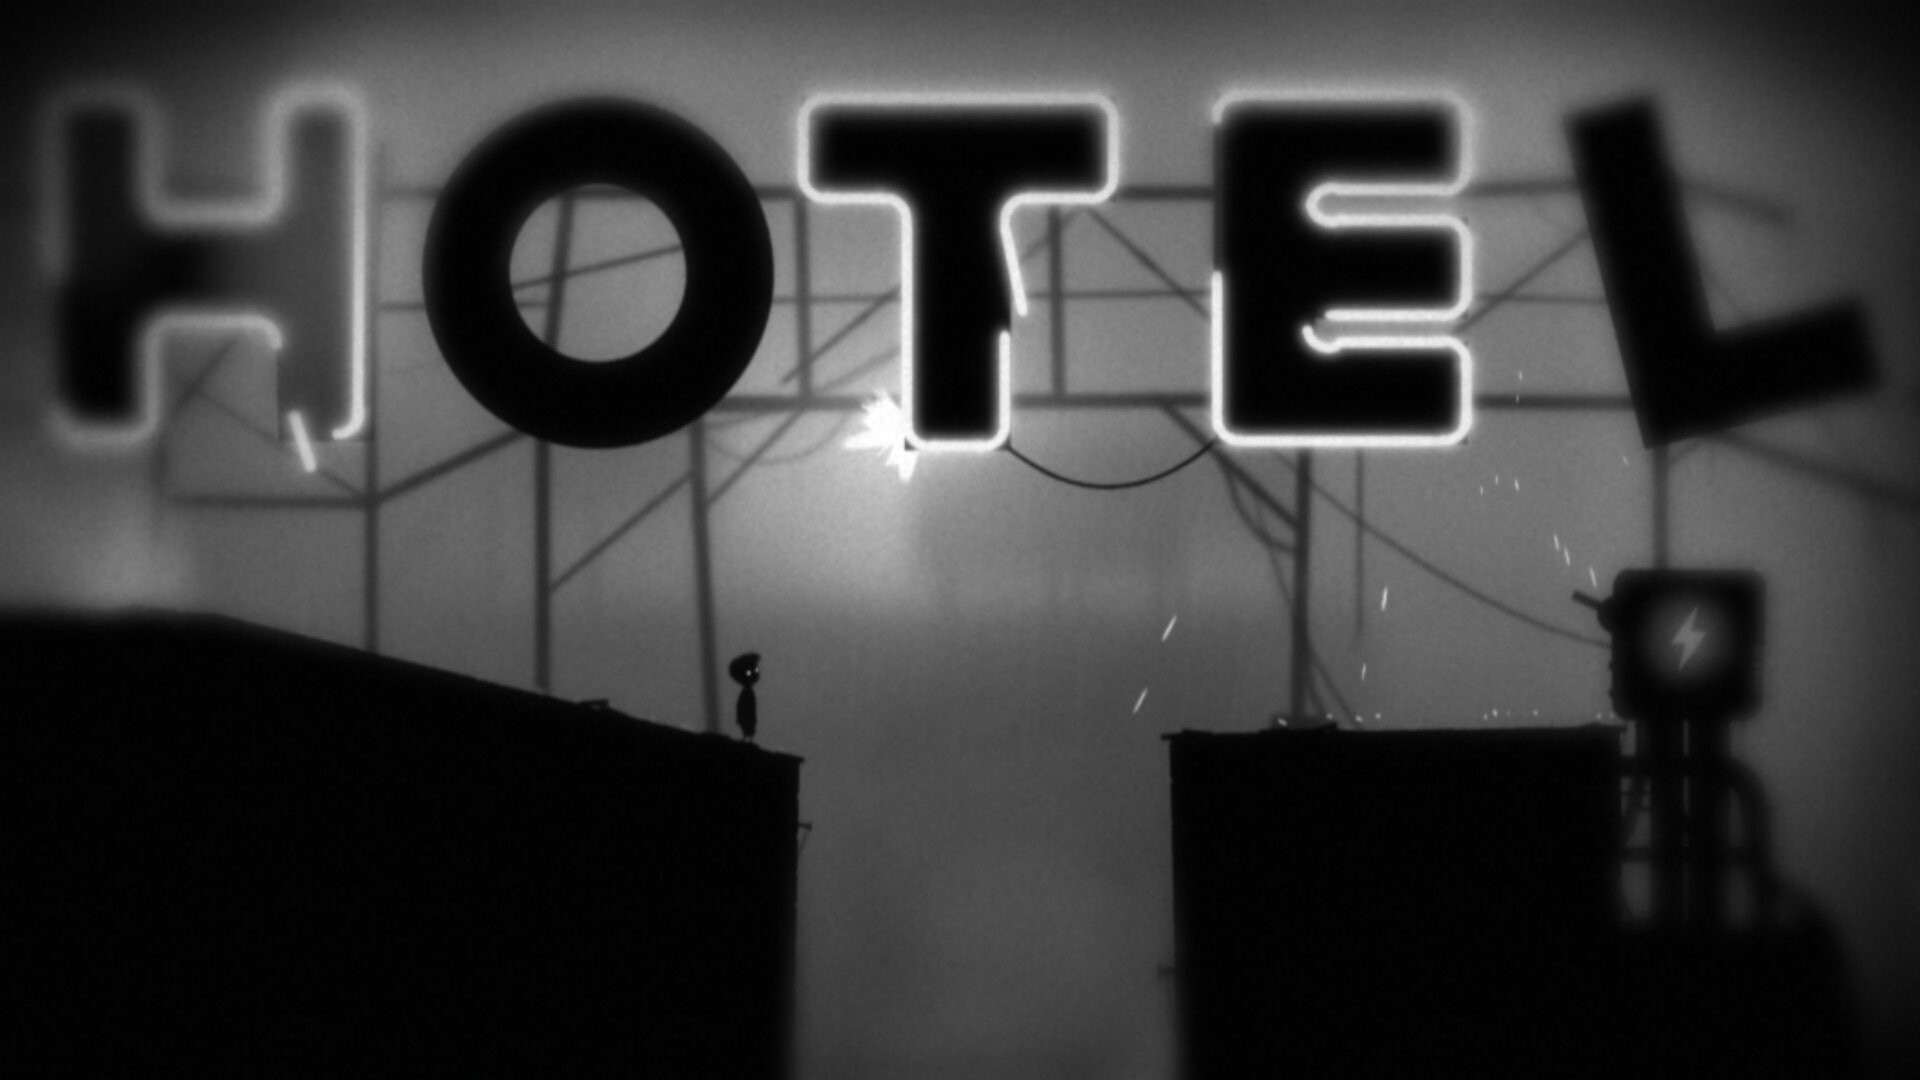 Limbo: A Video Game by Independent Studio Playdead, Hotels, Signs, Monochrome. 1920x1080 Full HD Background.